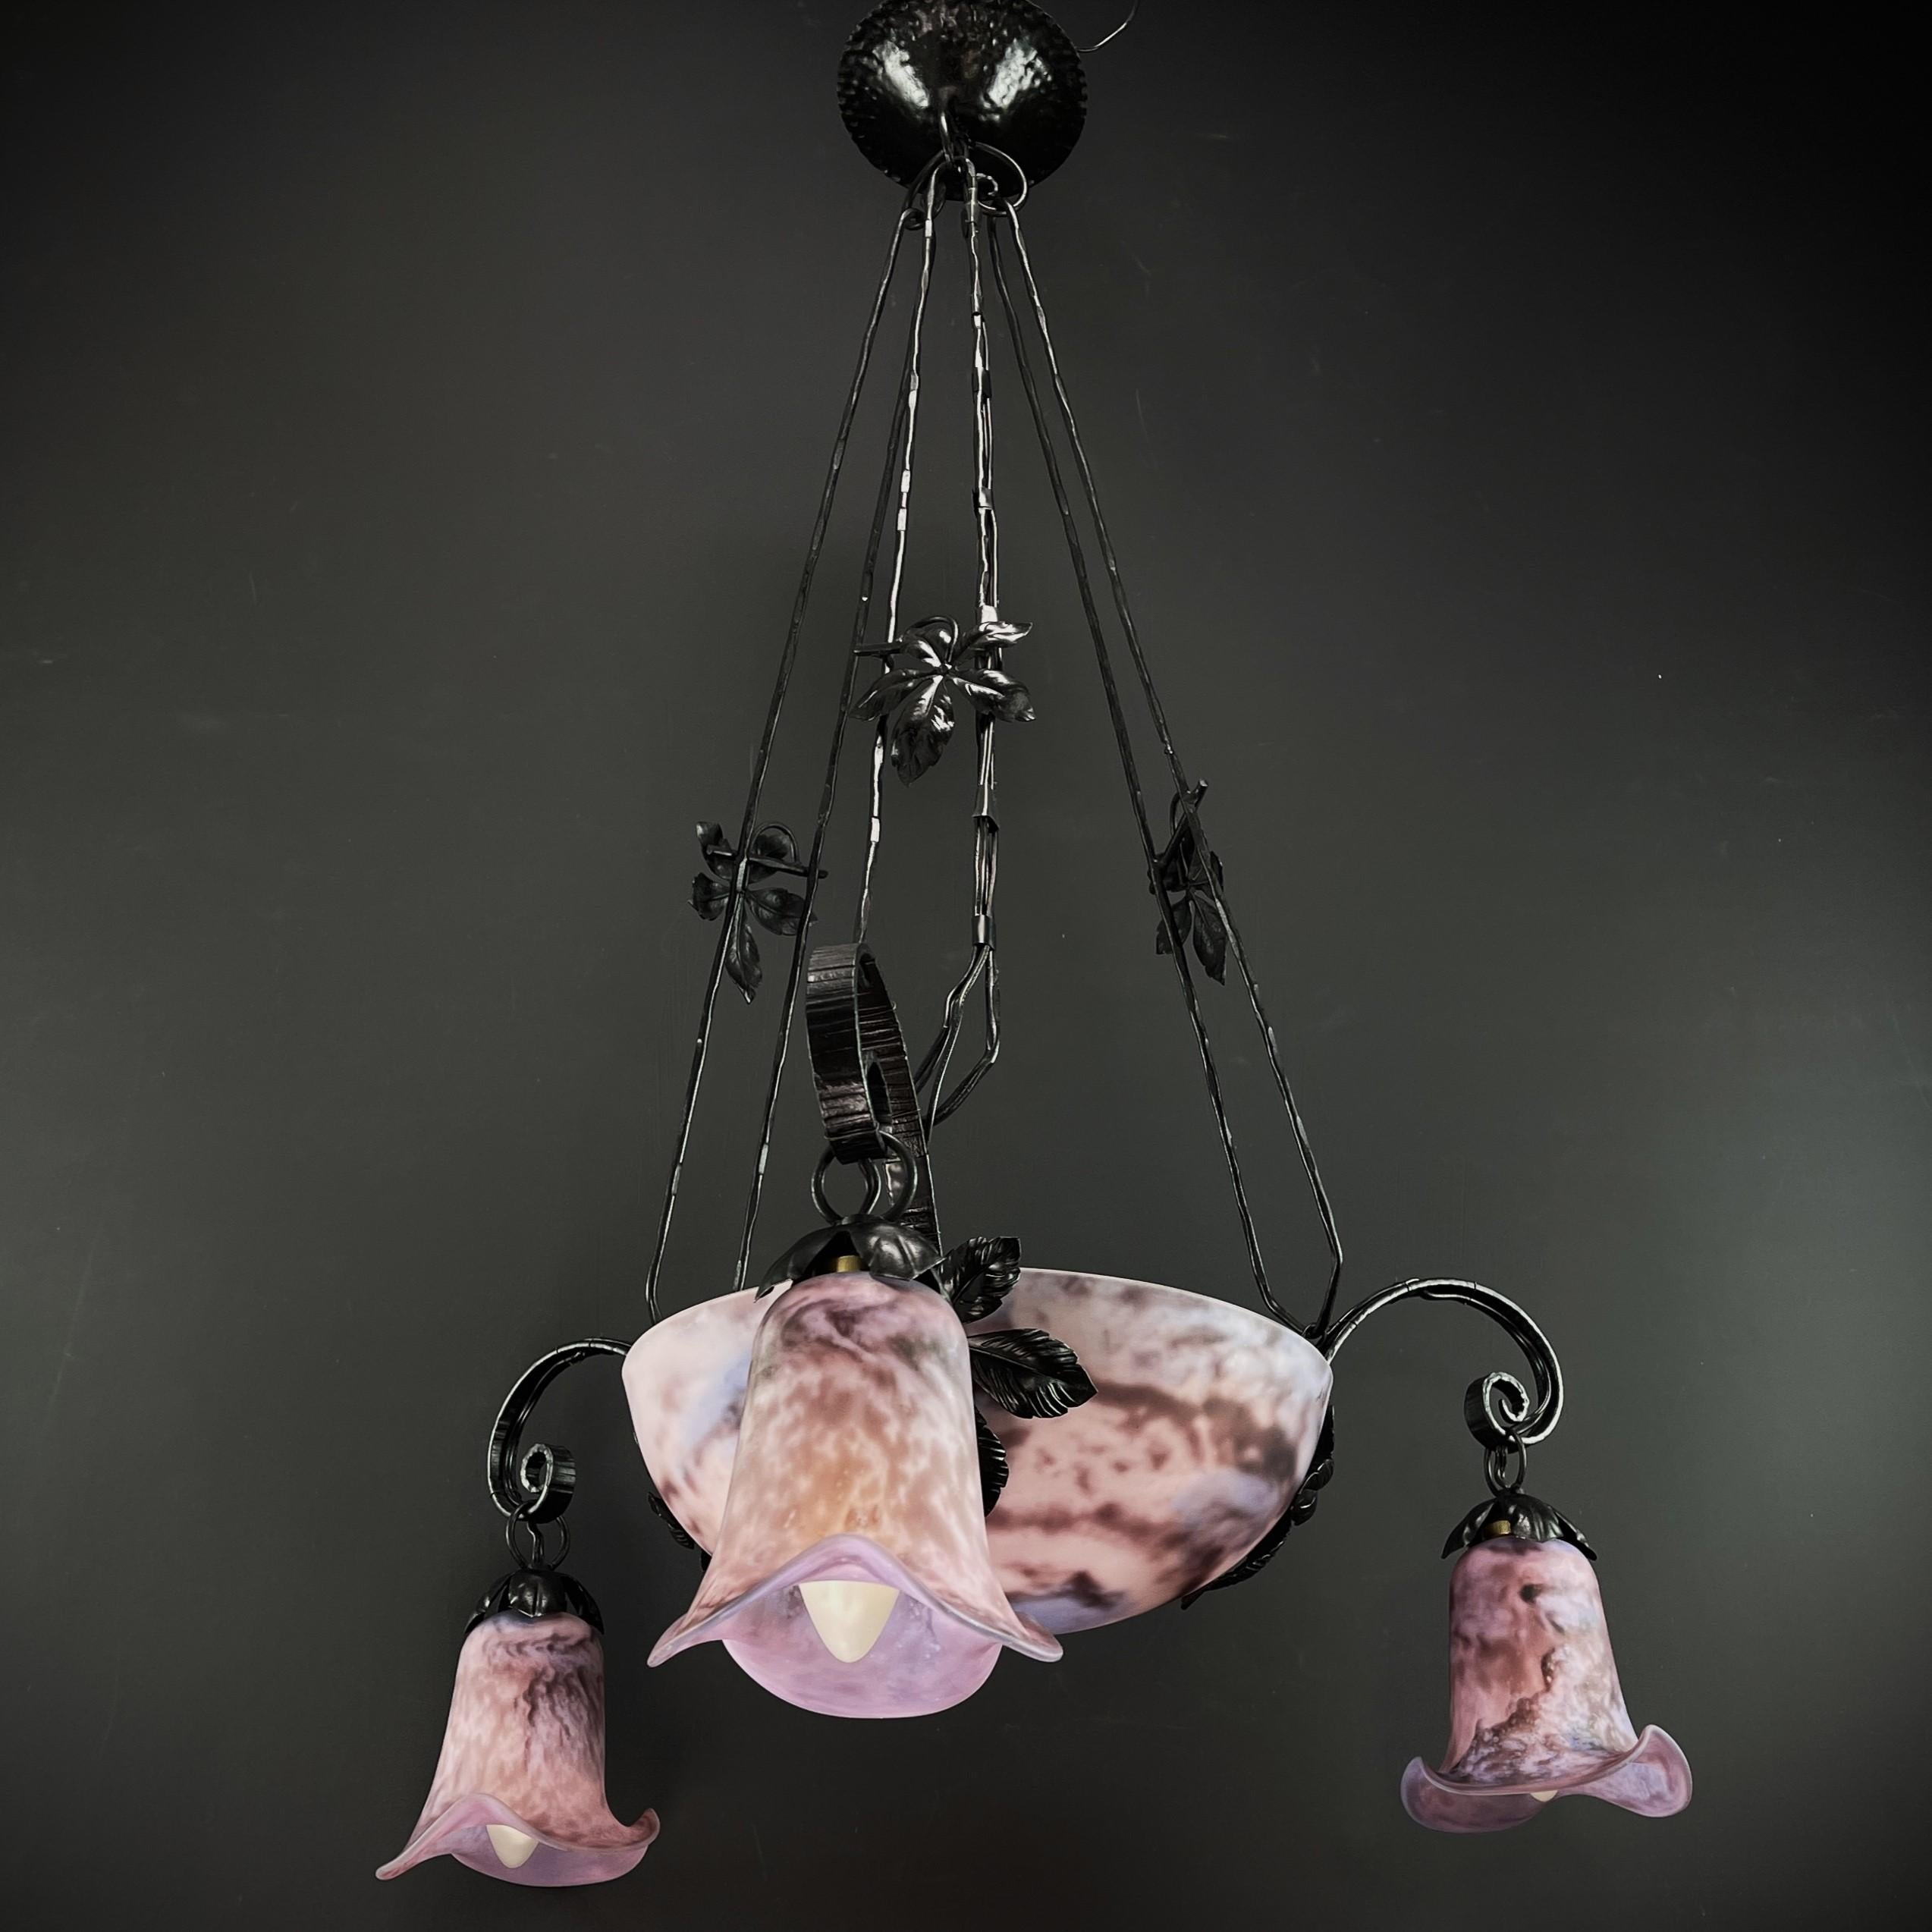 Art Deco Style wrought iron Lamp Pate de Verre

The ceiling lamp is a remarkable example of the craftsmanship and style of the early 20th century.

This ceiling lamp skilfully combines the robust wrought iron with the elegance of Pate de Verre